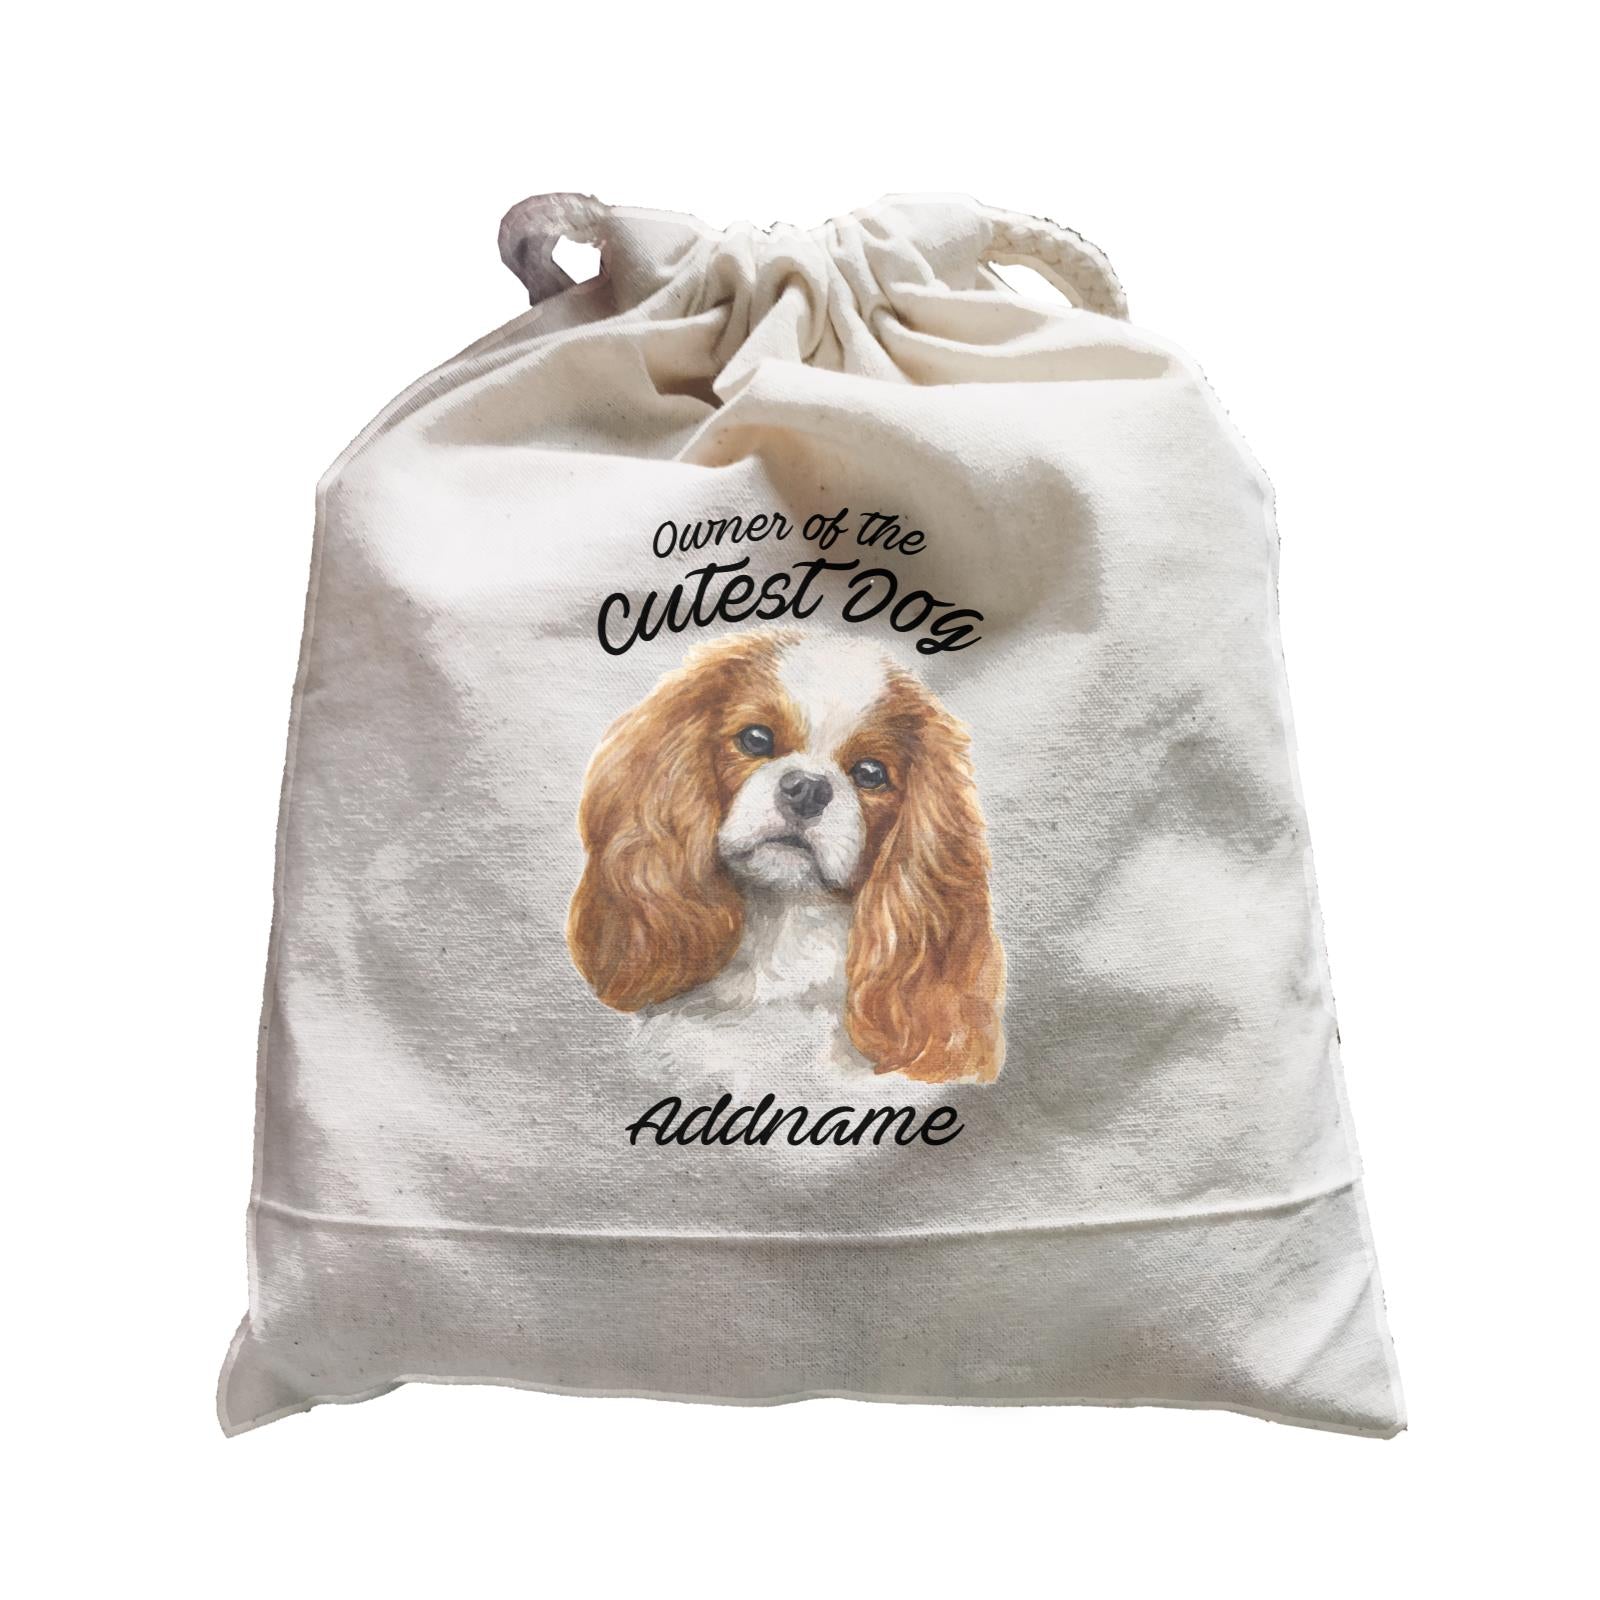 Watercolor Dog Owner Of The Cutest Dog King Charles Spaniel Curly Addname Satchel